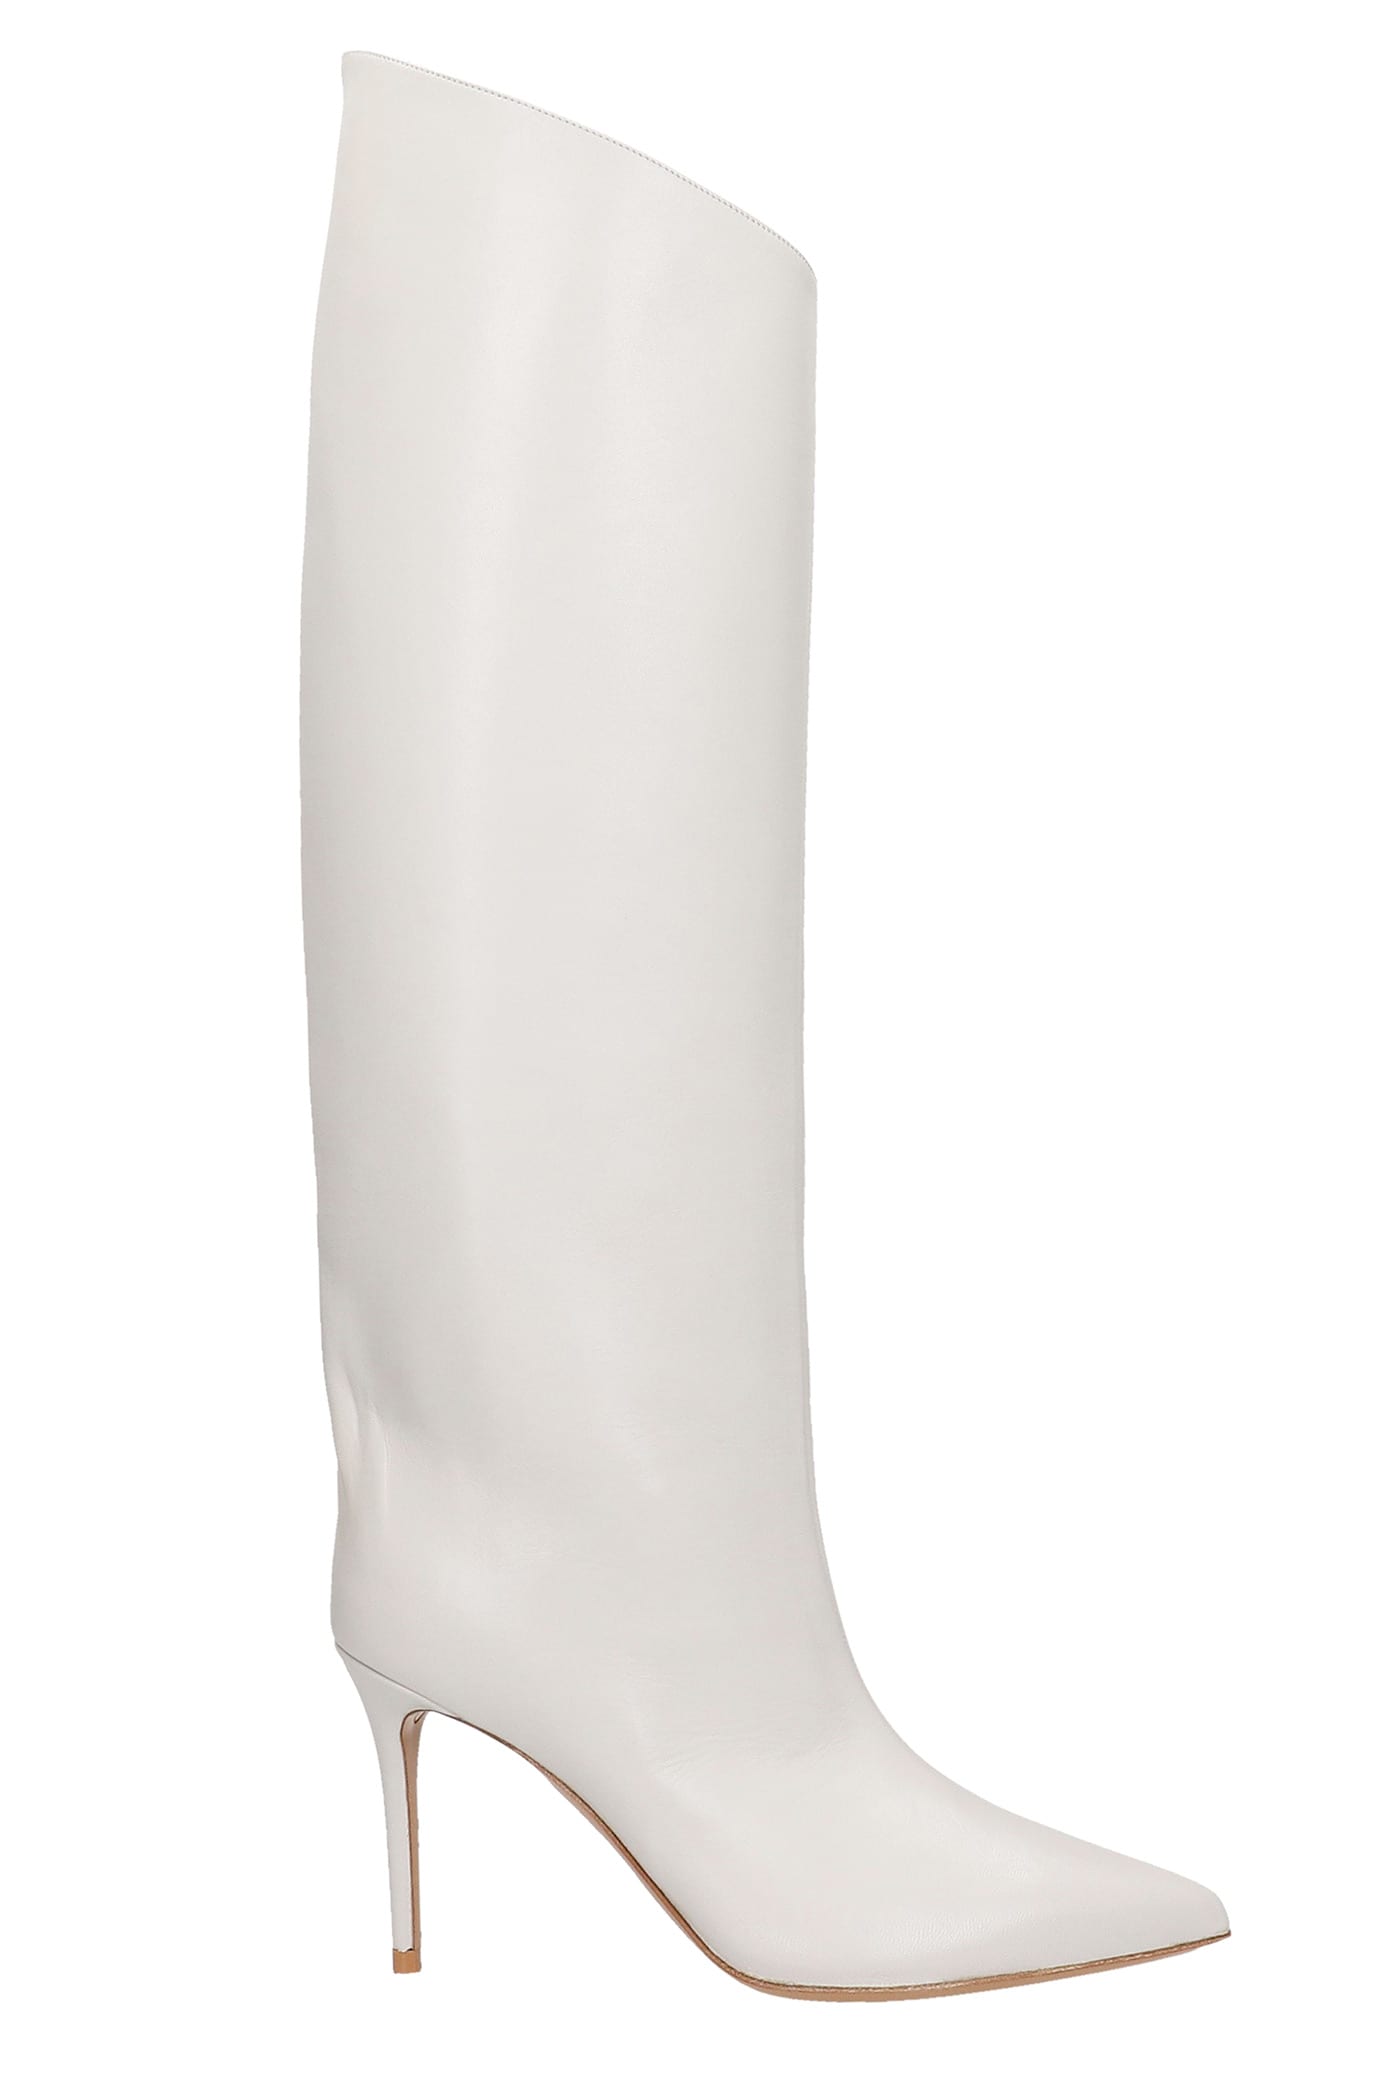 Alexandre Vauthier High Heels Boots In White Leather